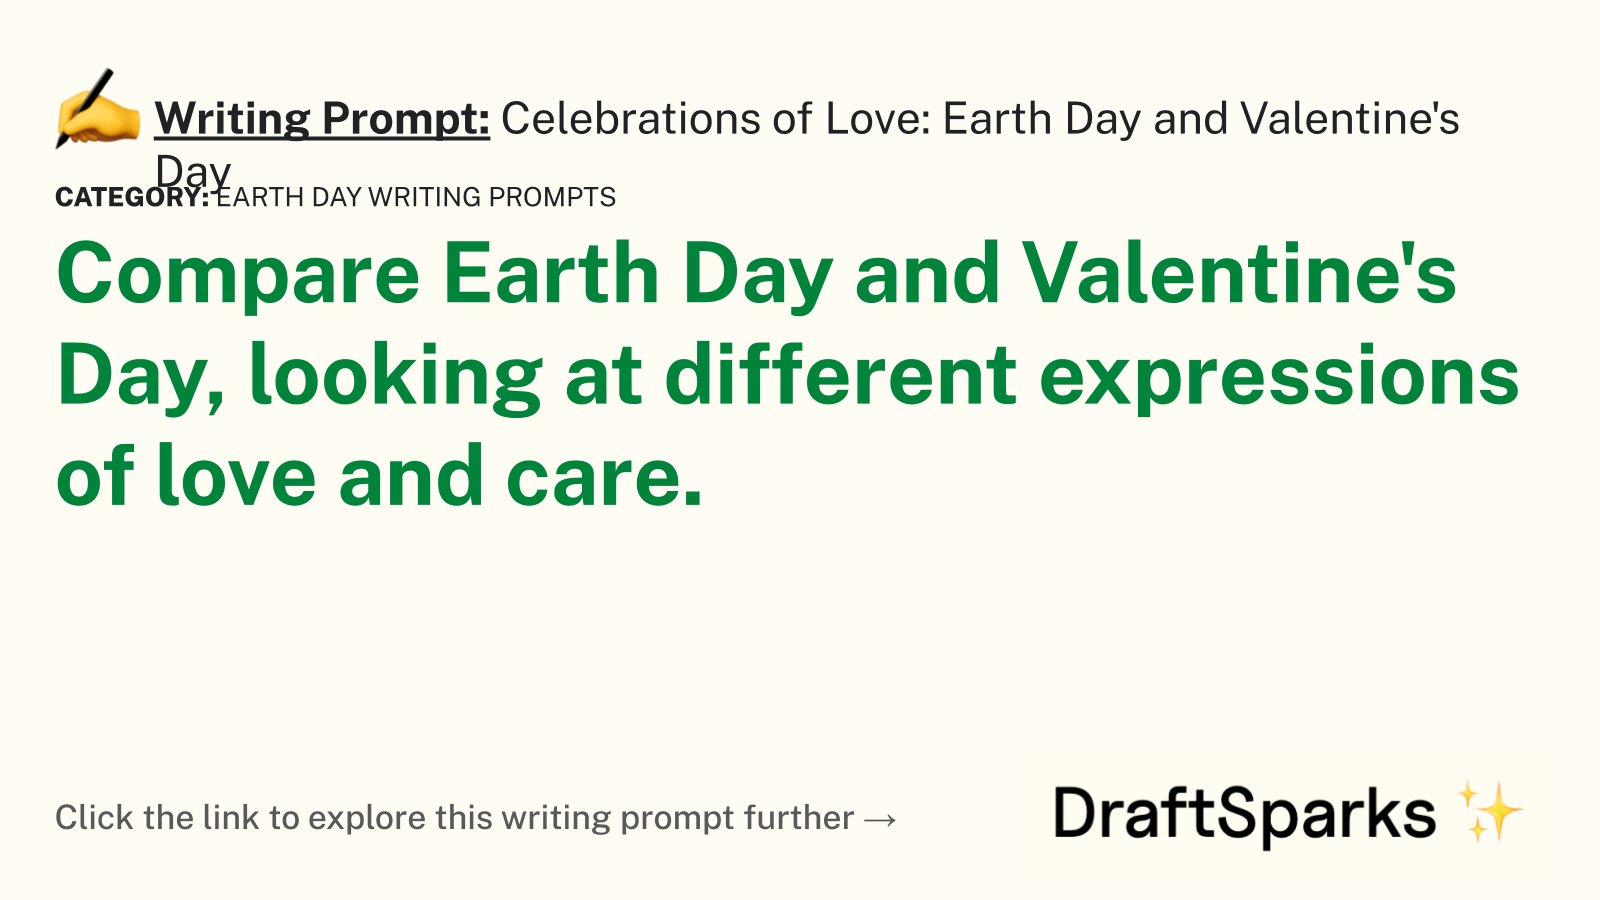 Celebrations of Love: Earth Day and Valentine’s Day